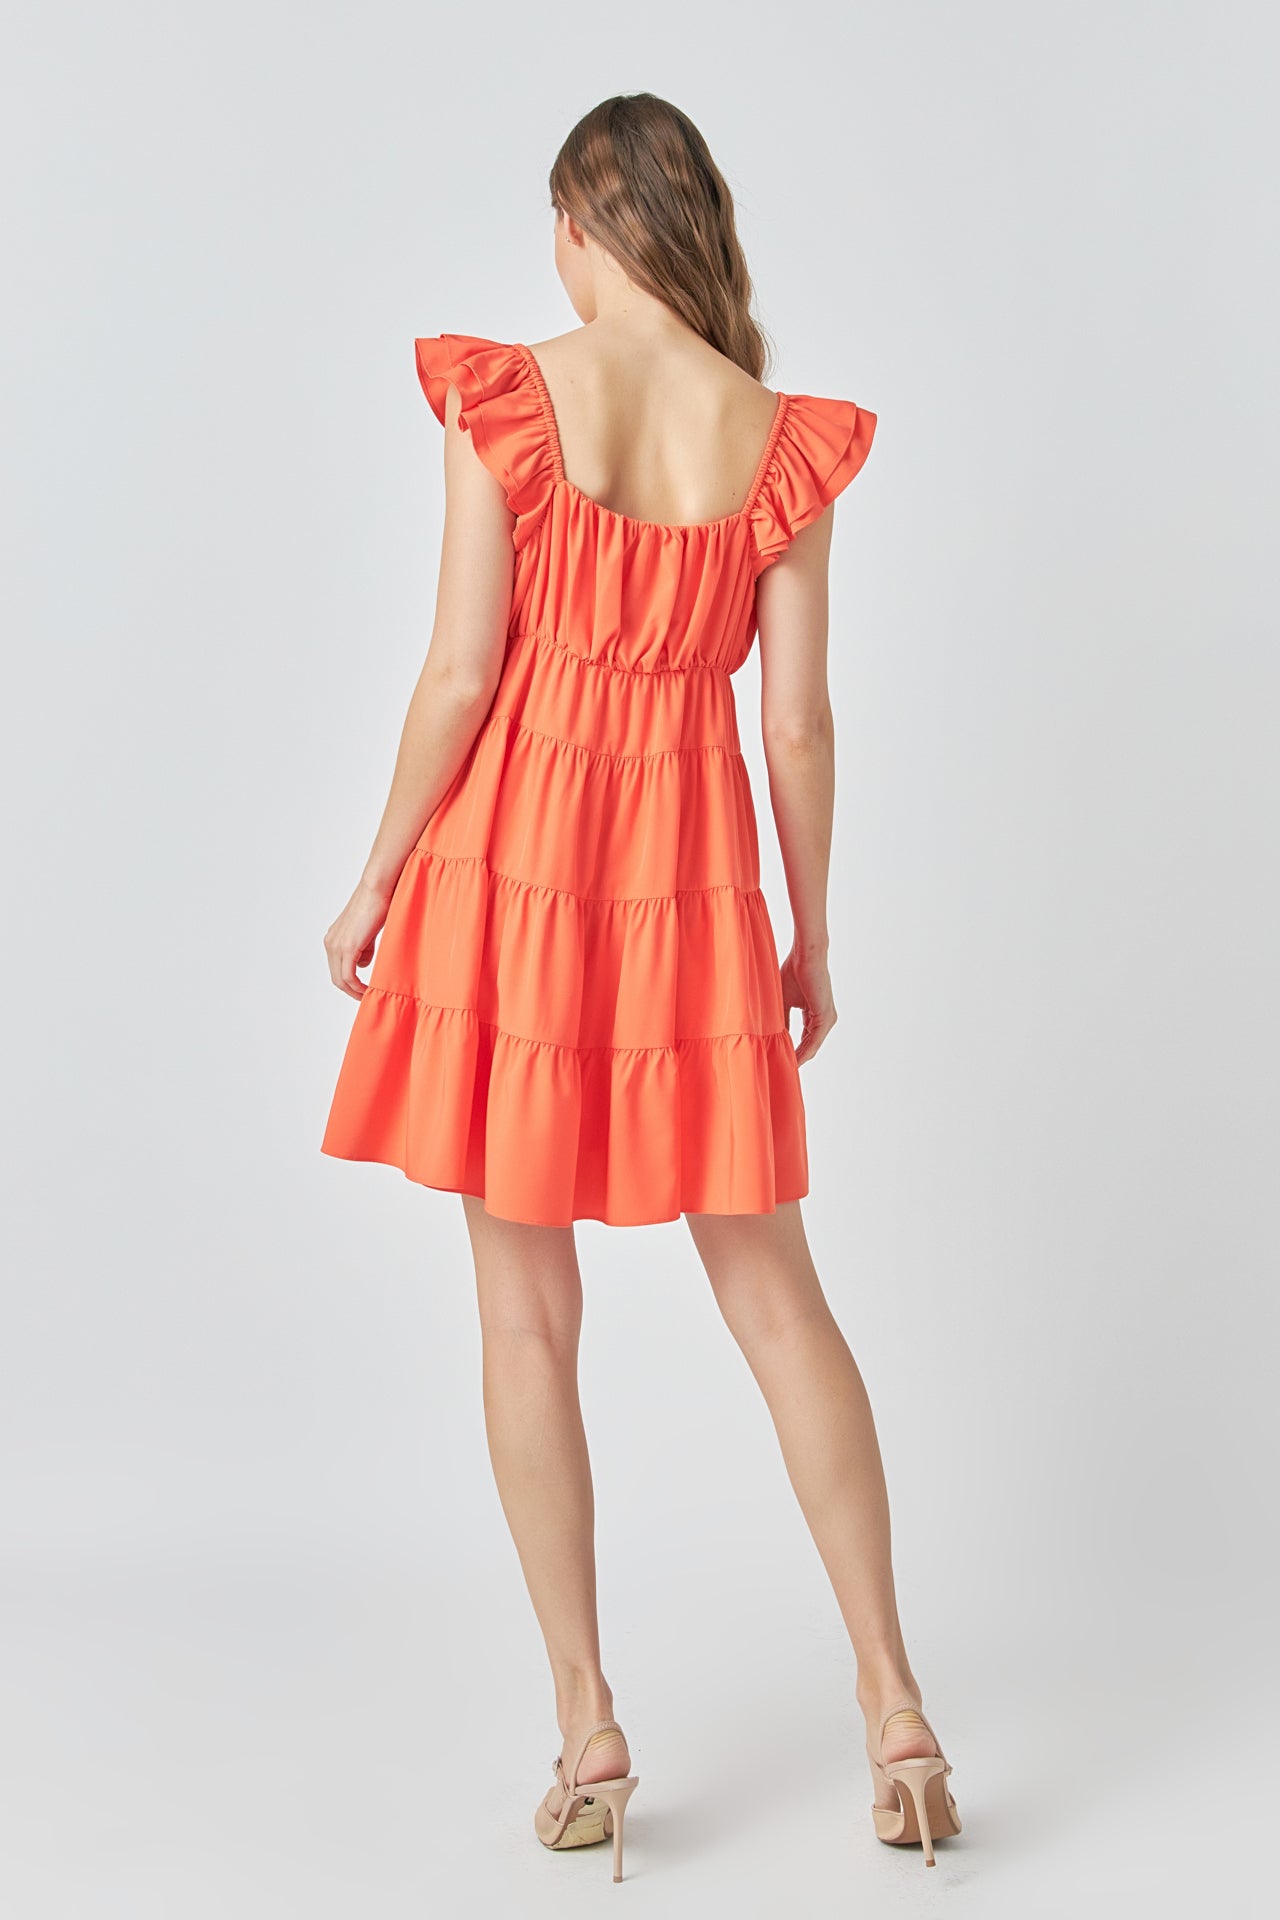 ENDLESS ROSE - Tiered Mini Dress - DRESSES available at Objectrare